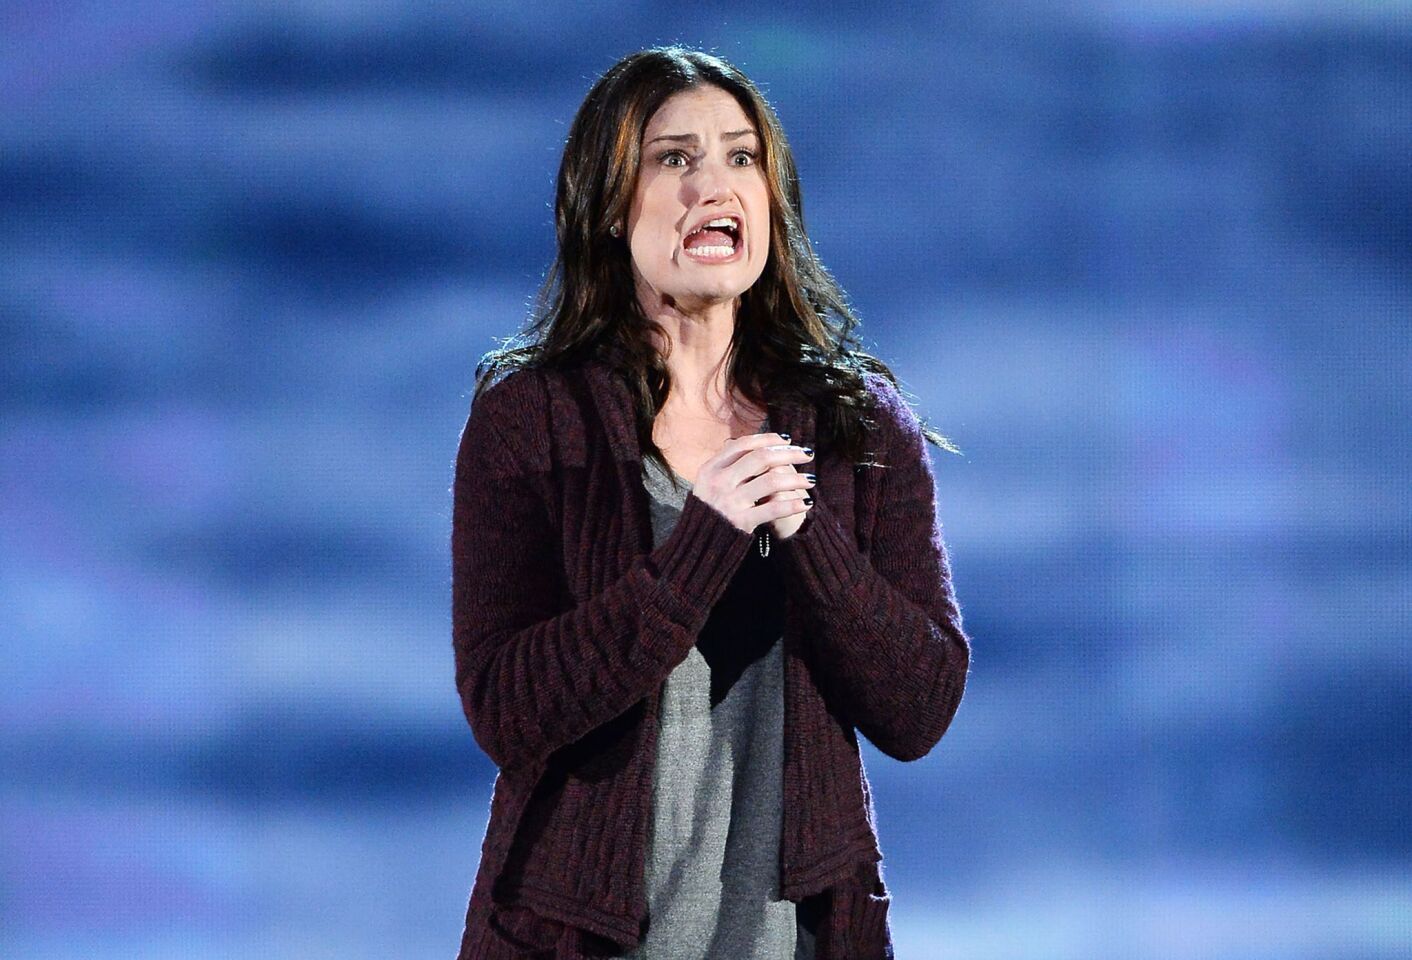 Idina Menzel performs songs from "If/Then" onstage.